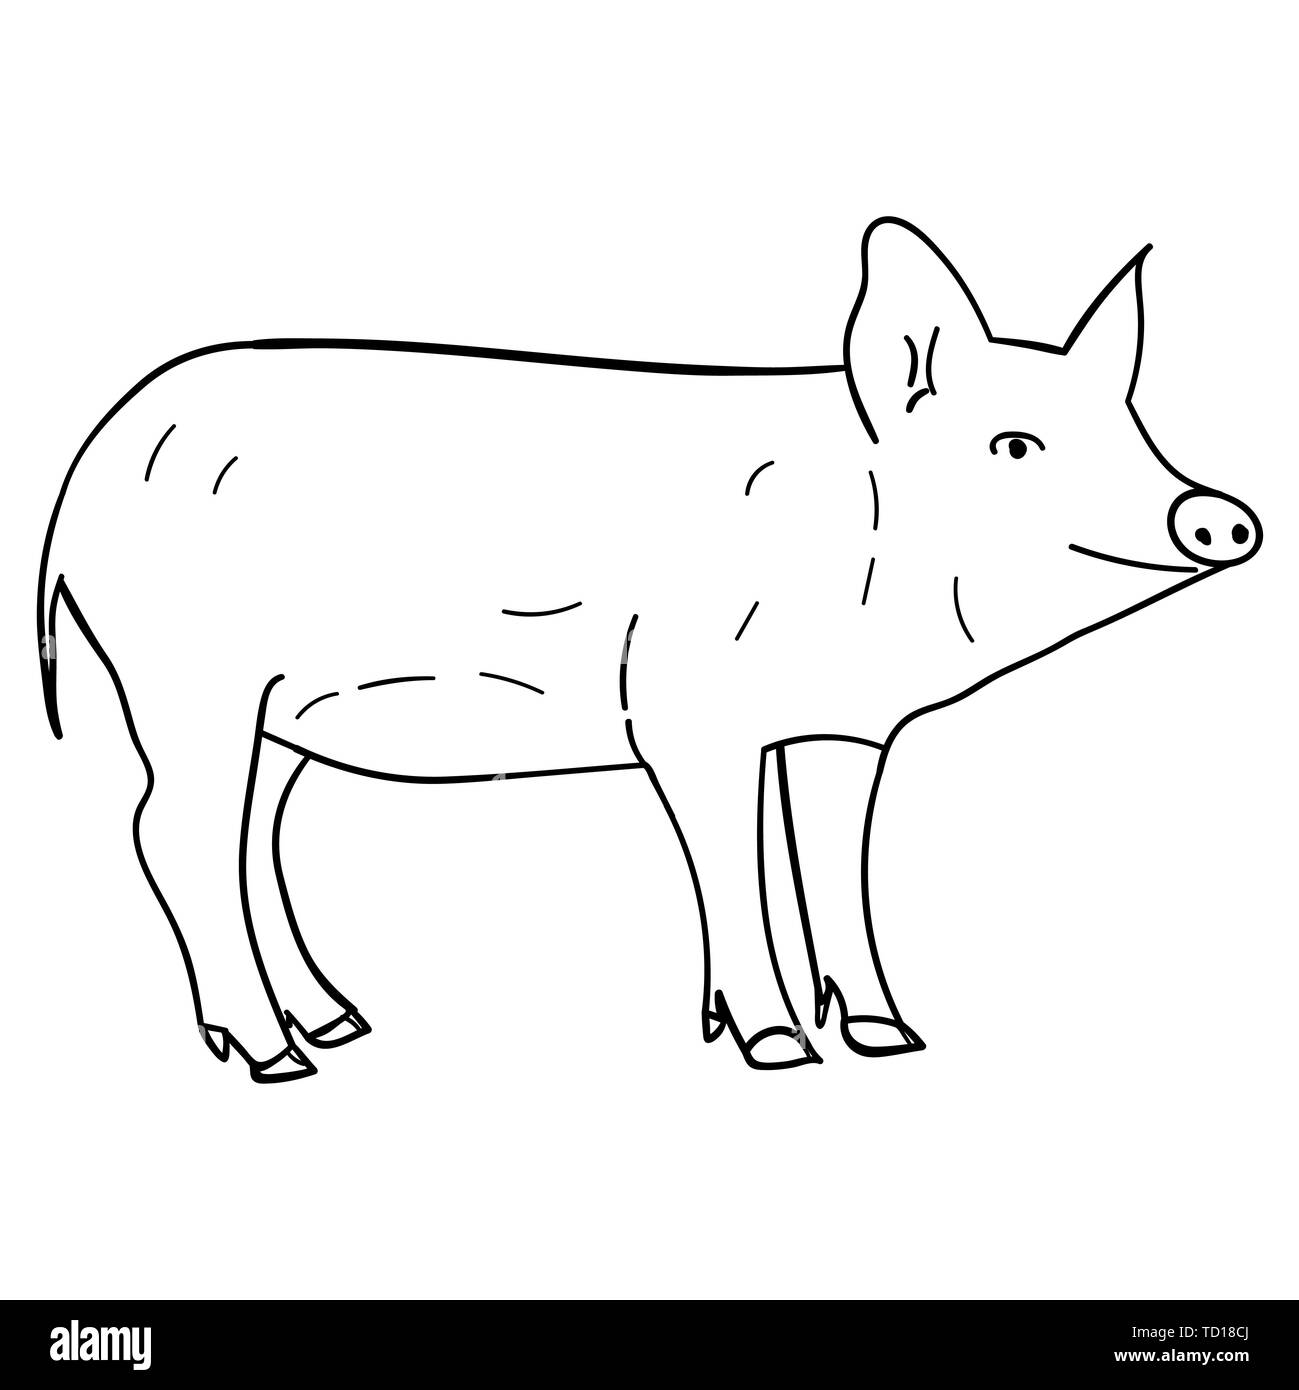 Contour pig in doodle style.  illustration on white background. Stock Photo